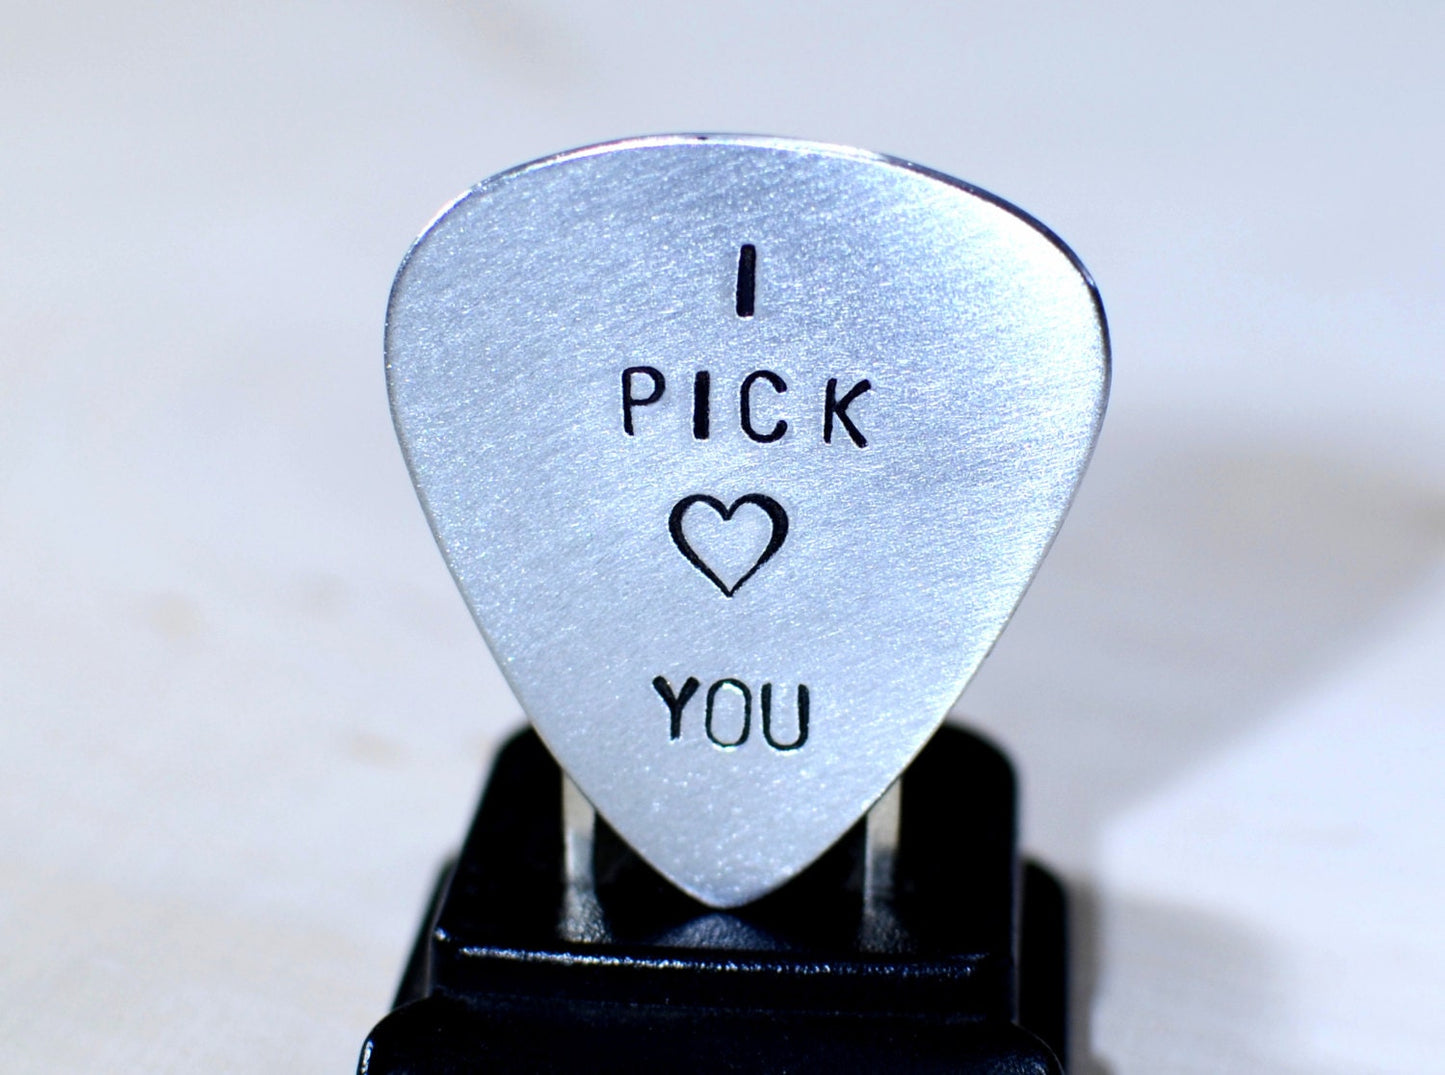 Aluminum I pick you guitar pick with a small heart design